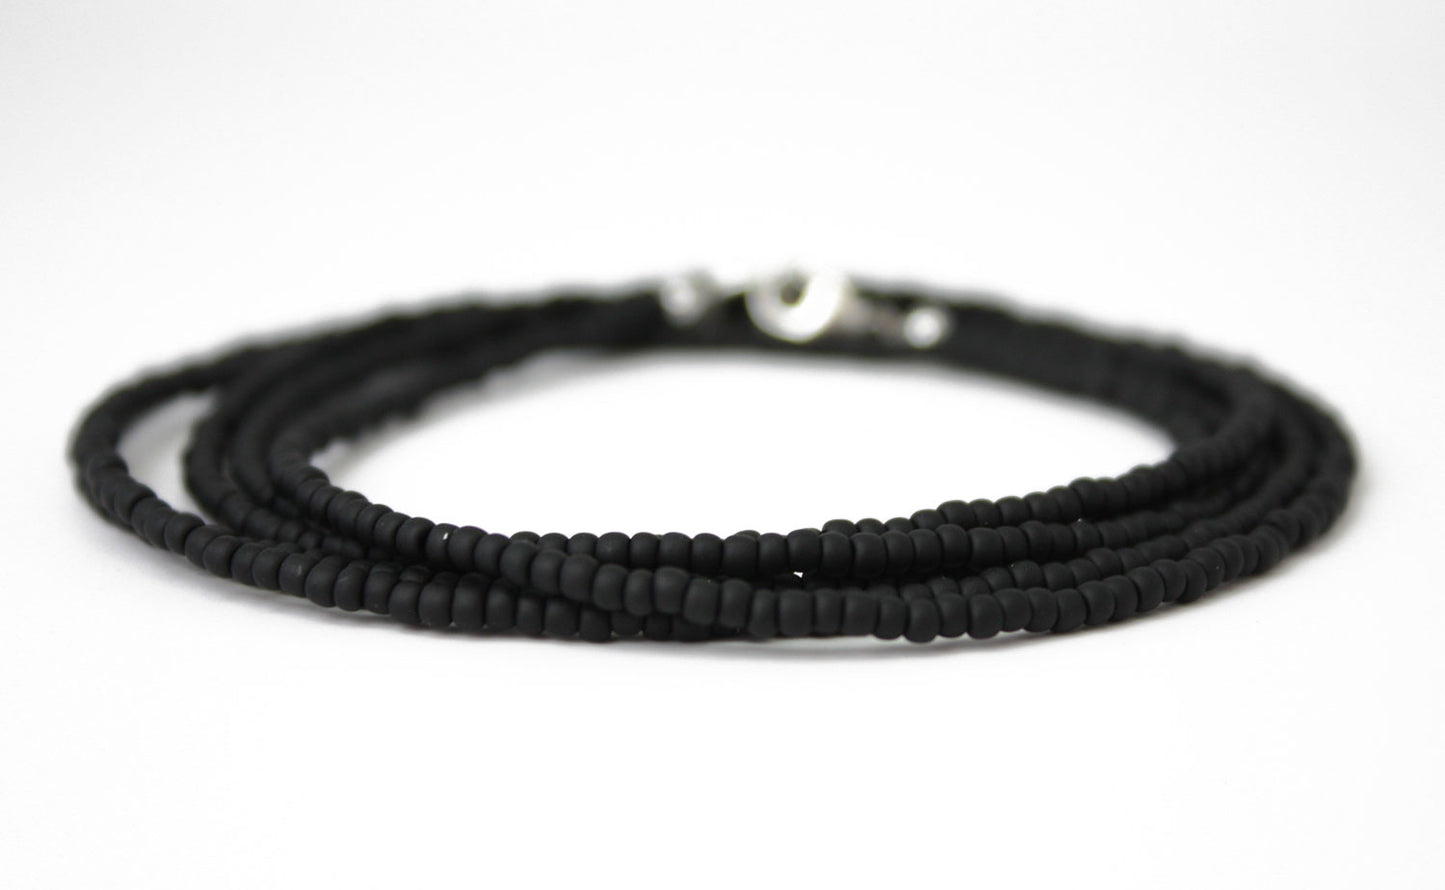 Matte Black Seed Bead Necklace